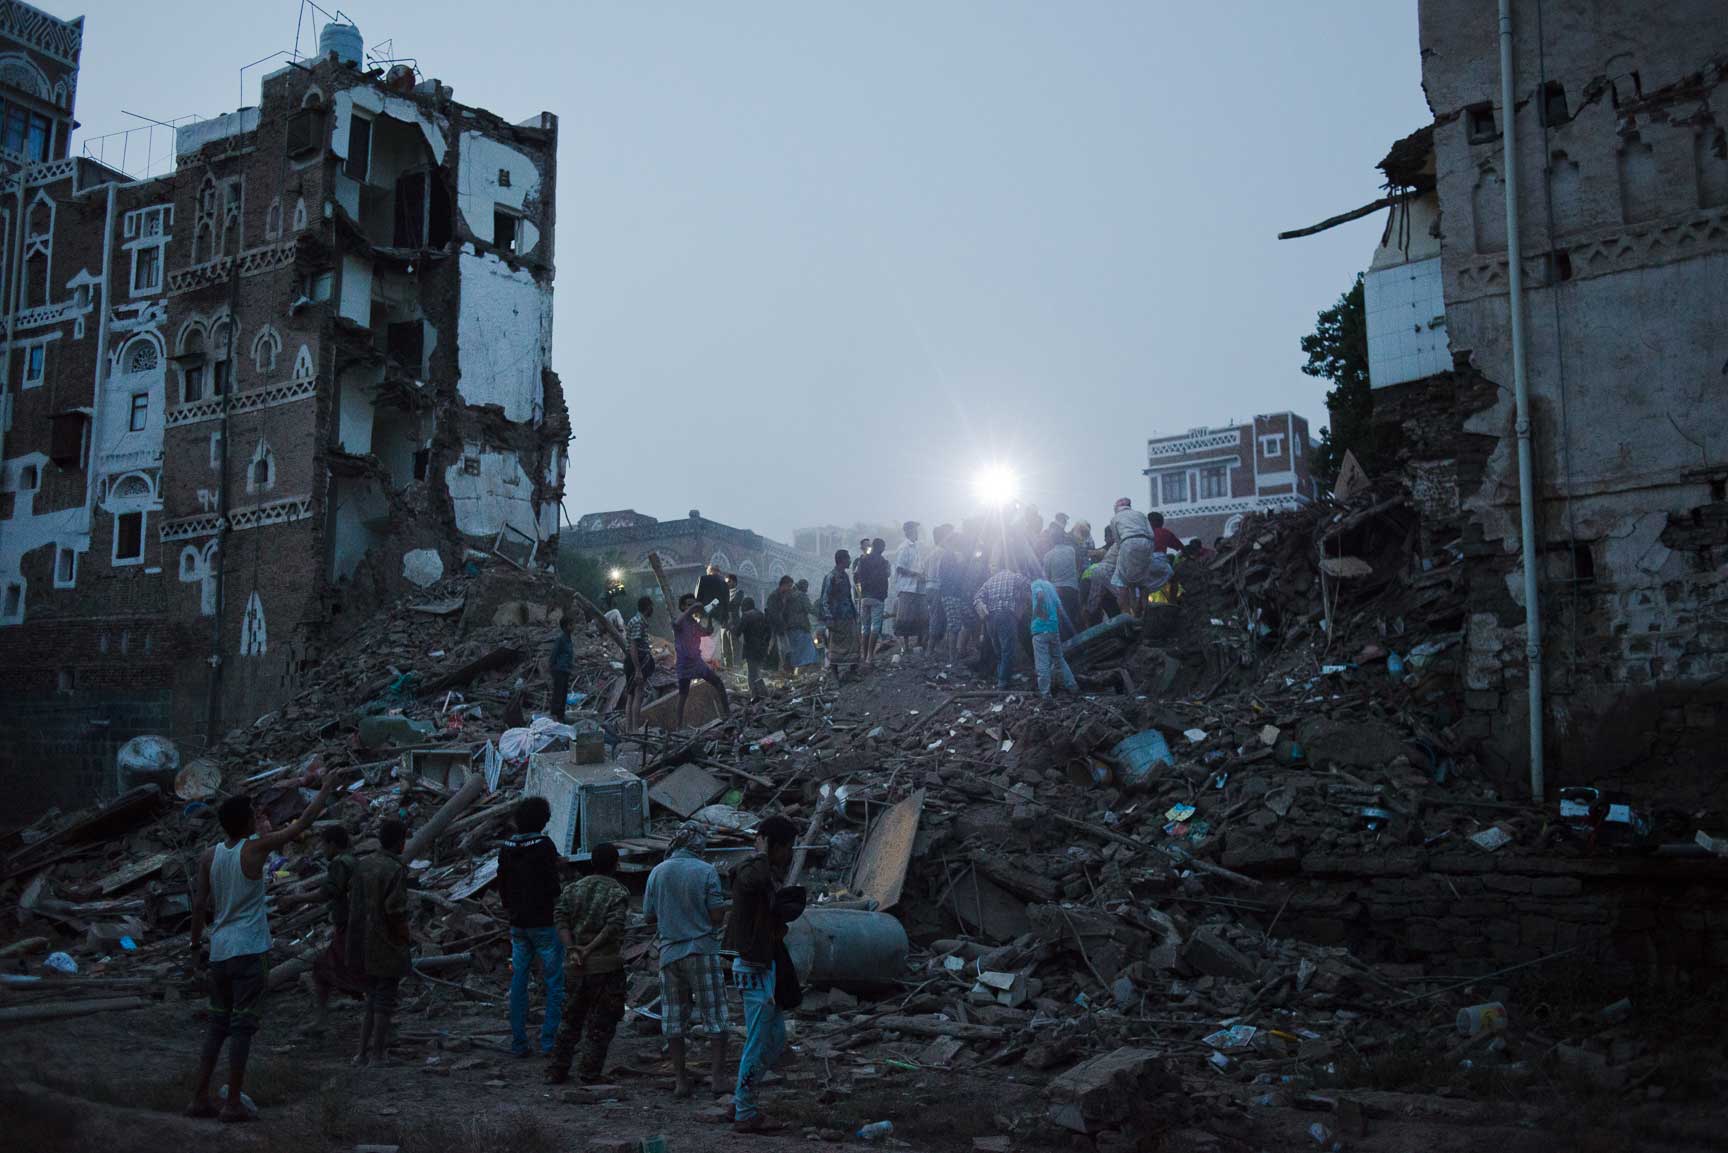 Yemeni men from al Qasimi neighborhood dig through the remains of four homes destroyed in an airstrike Friday, June 12, 2015 in Sana'a, Yemen. The Old City of Sana'a is a UNESCO World Heritage Site, is a densely populated civilian area. The Saudi-led coalition denied hitting the Old City.